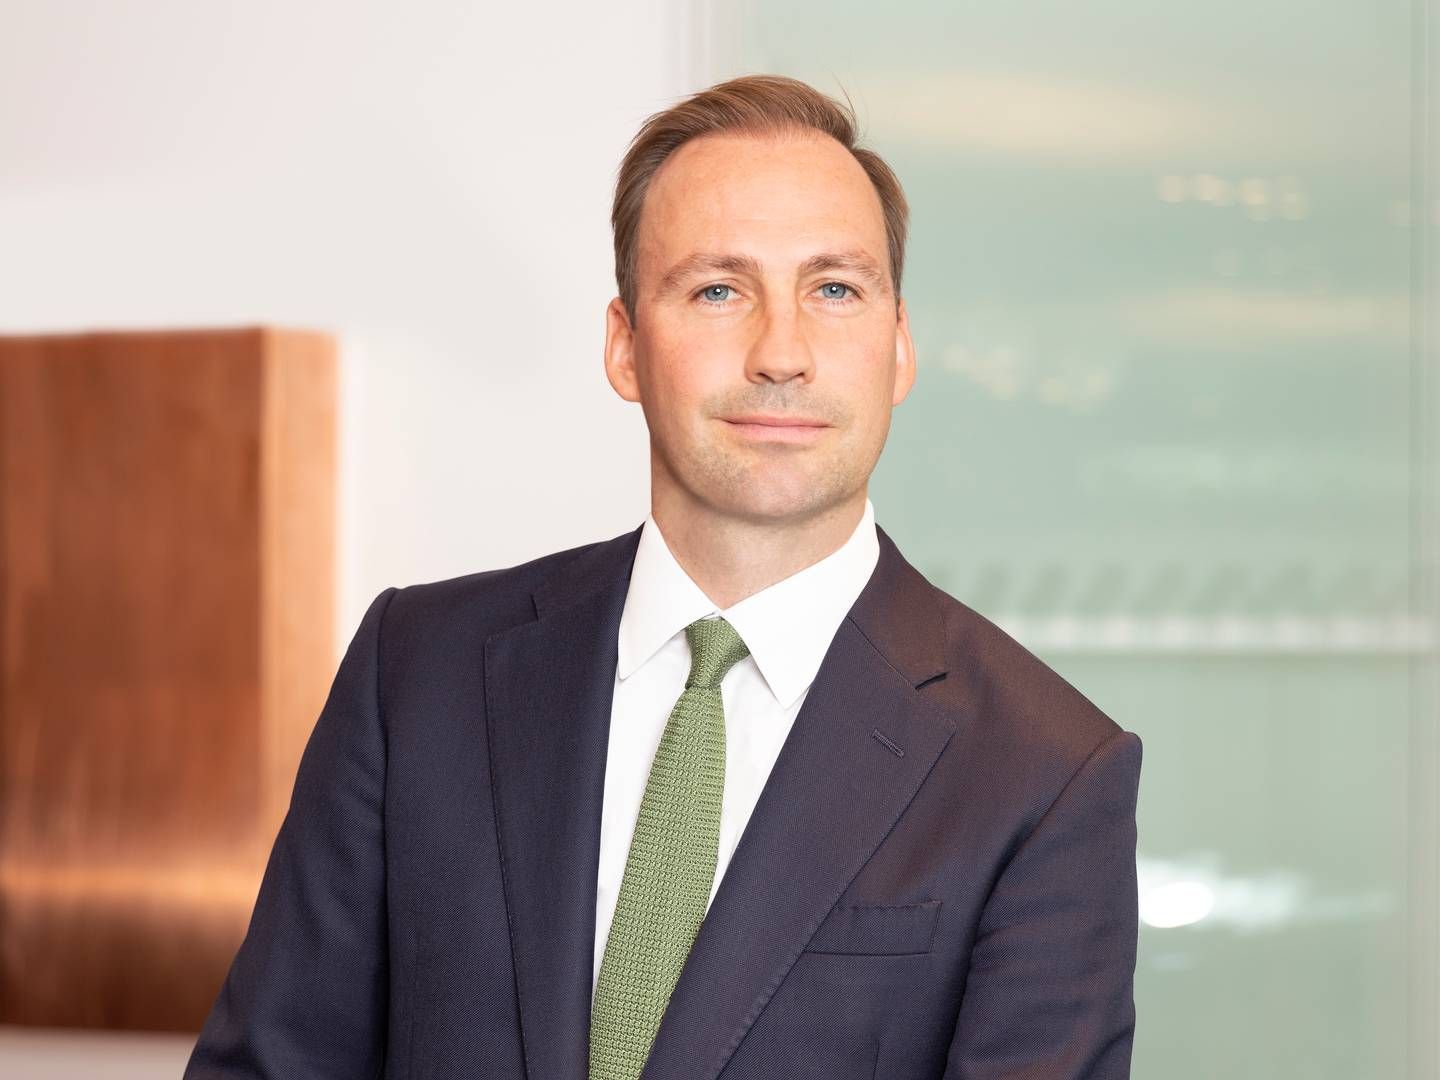 MPC Container Ships finds itself in a fragmented feeder market which could mean coming consolidations, says CEO Constantin Baack. | Foto: Pr / Mpc Container Ships